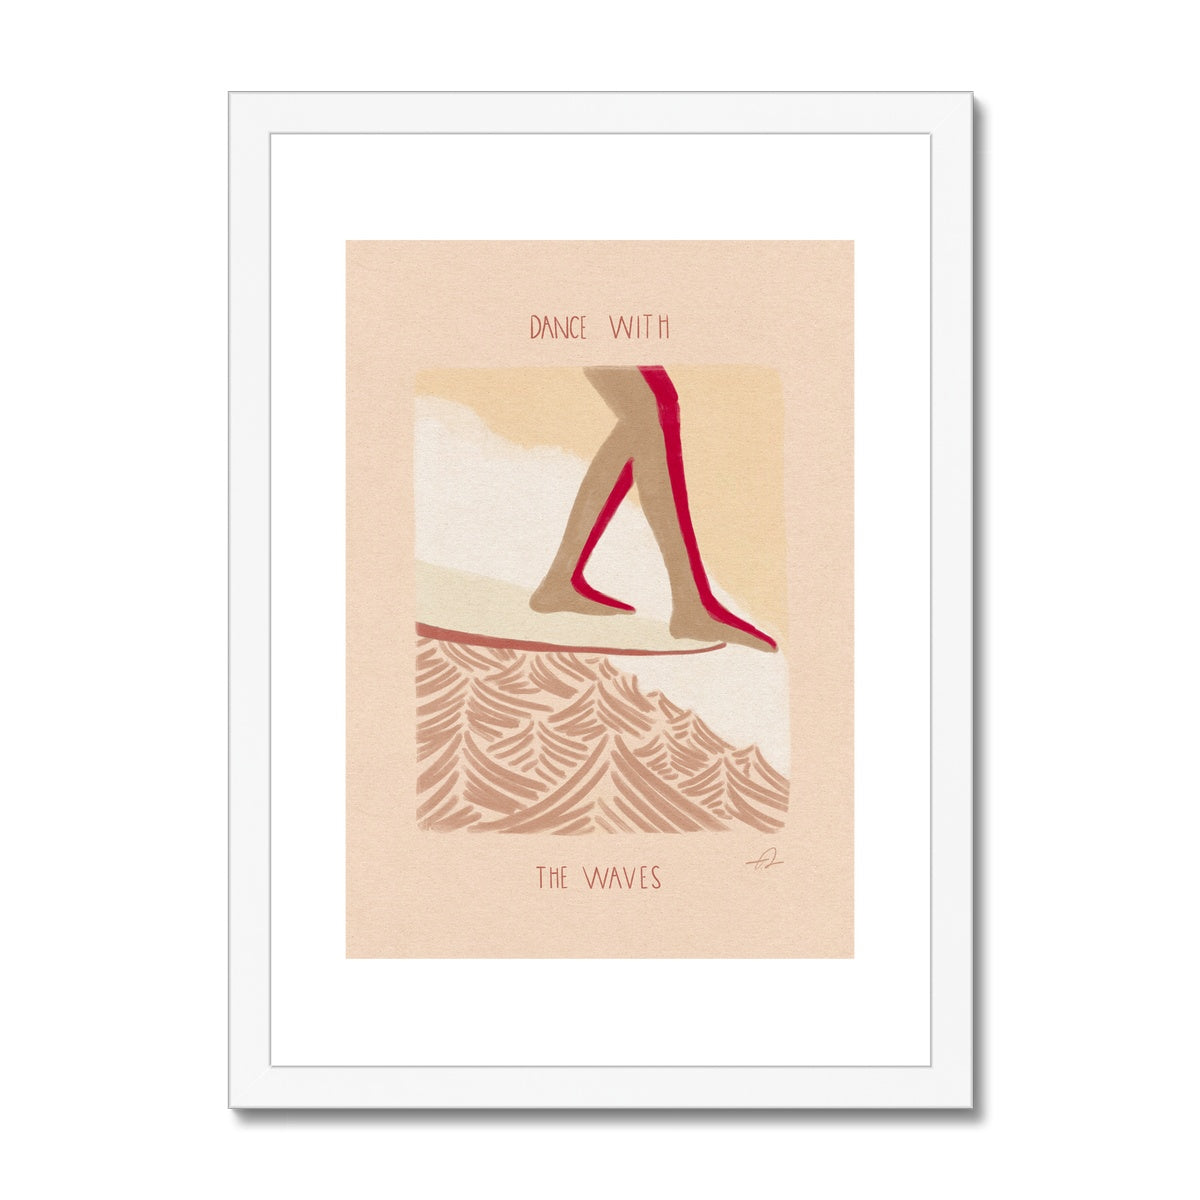 Dance with the waves Framed & Mounted Print